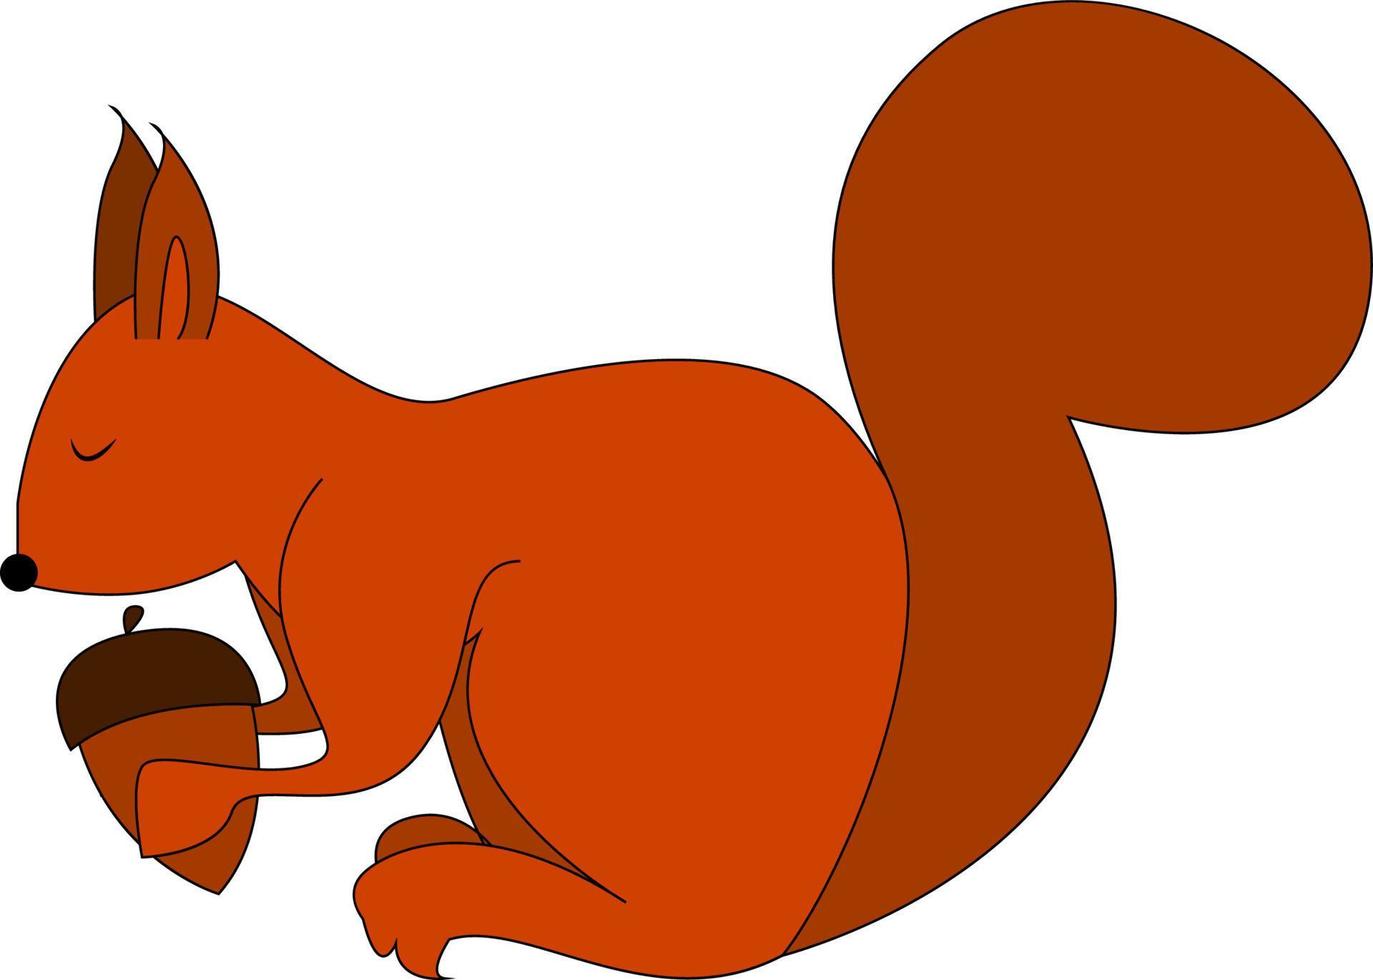 Squirrel with acorn nut, vector or color illustration.